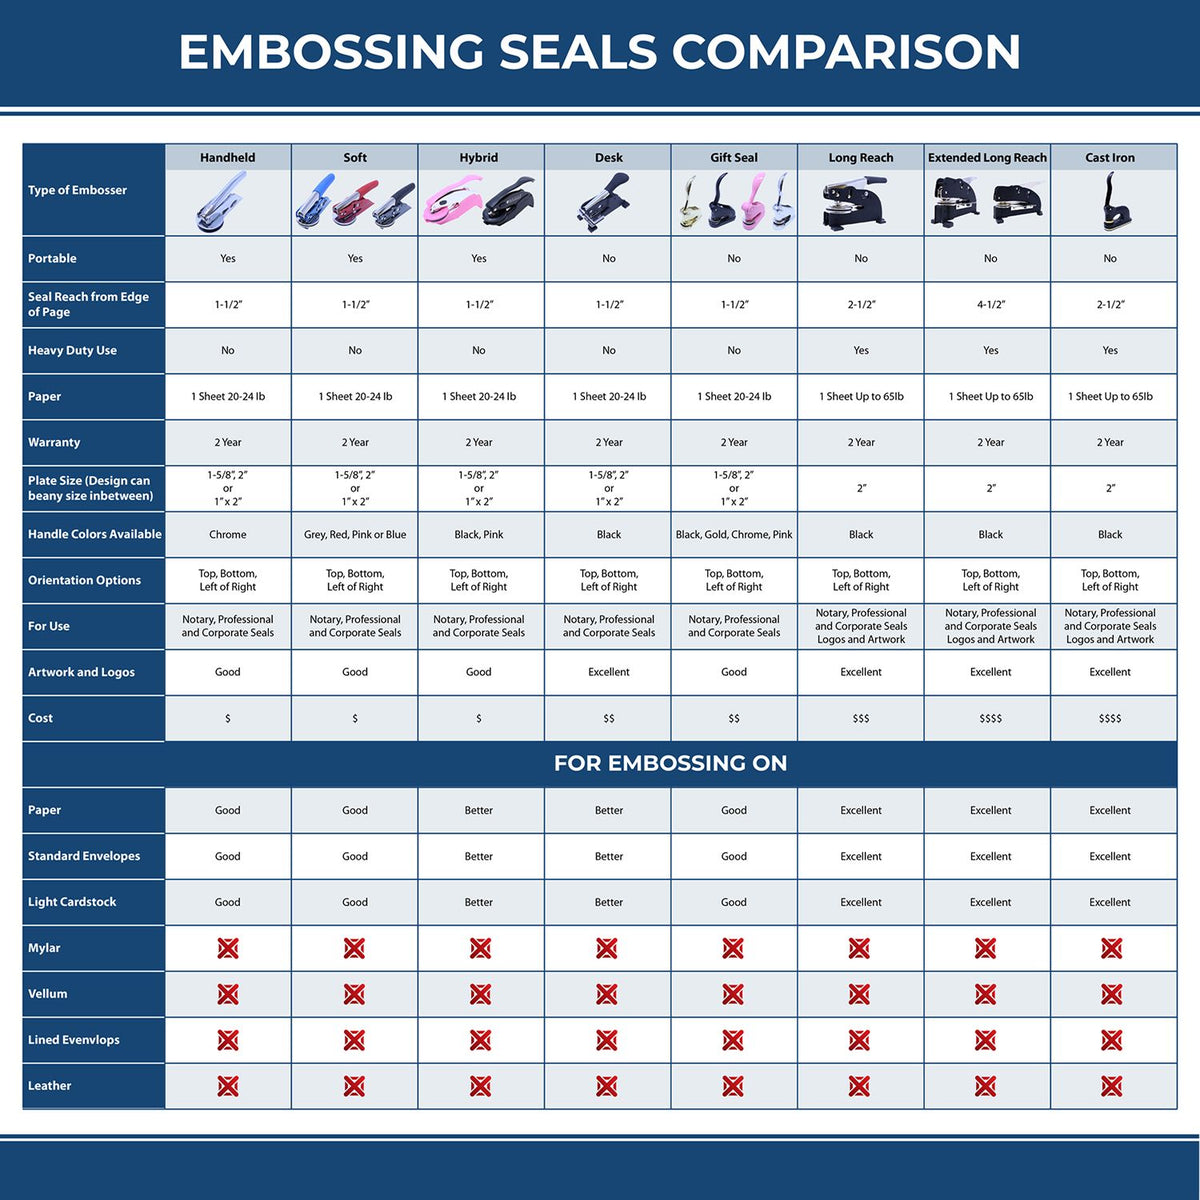 A comparison chart for the different types of mount models available for the Long Reach Alabama Land Surveyor Seal.